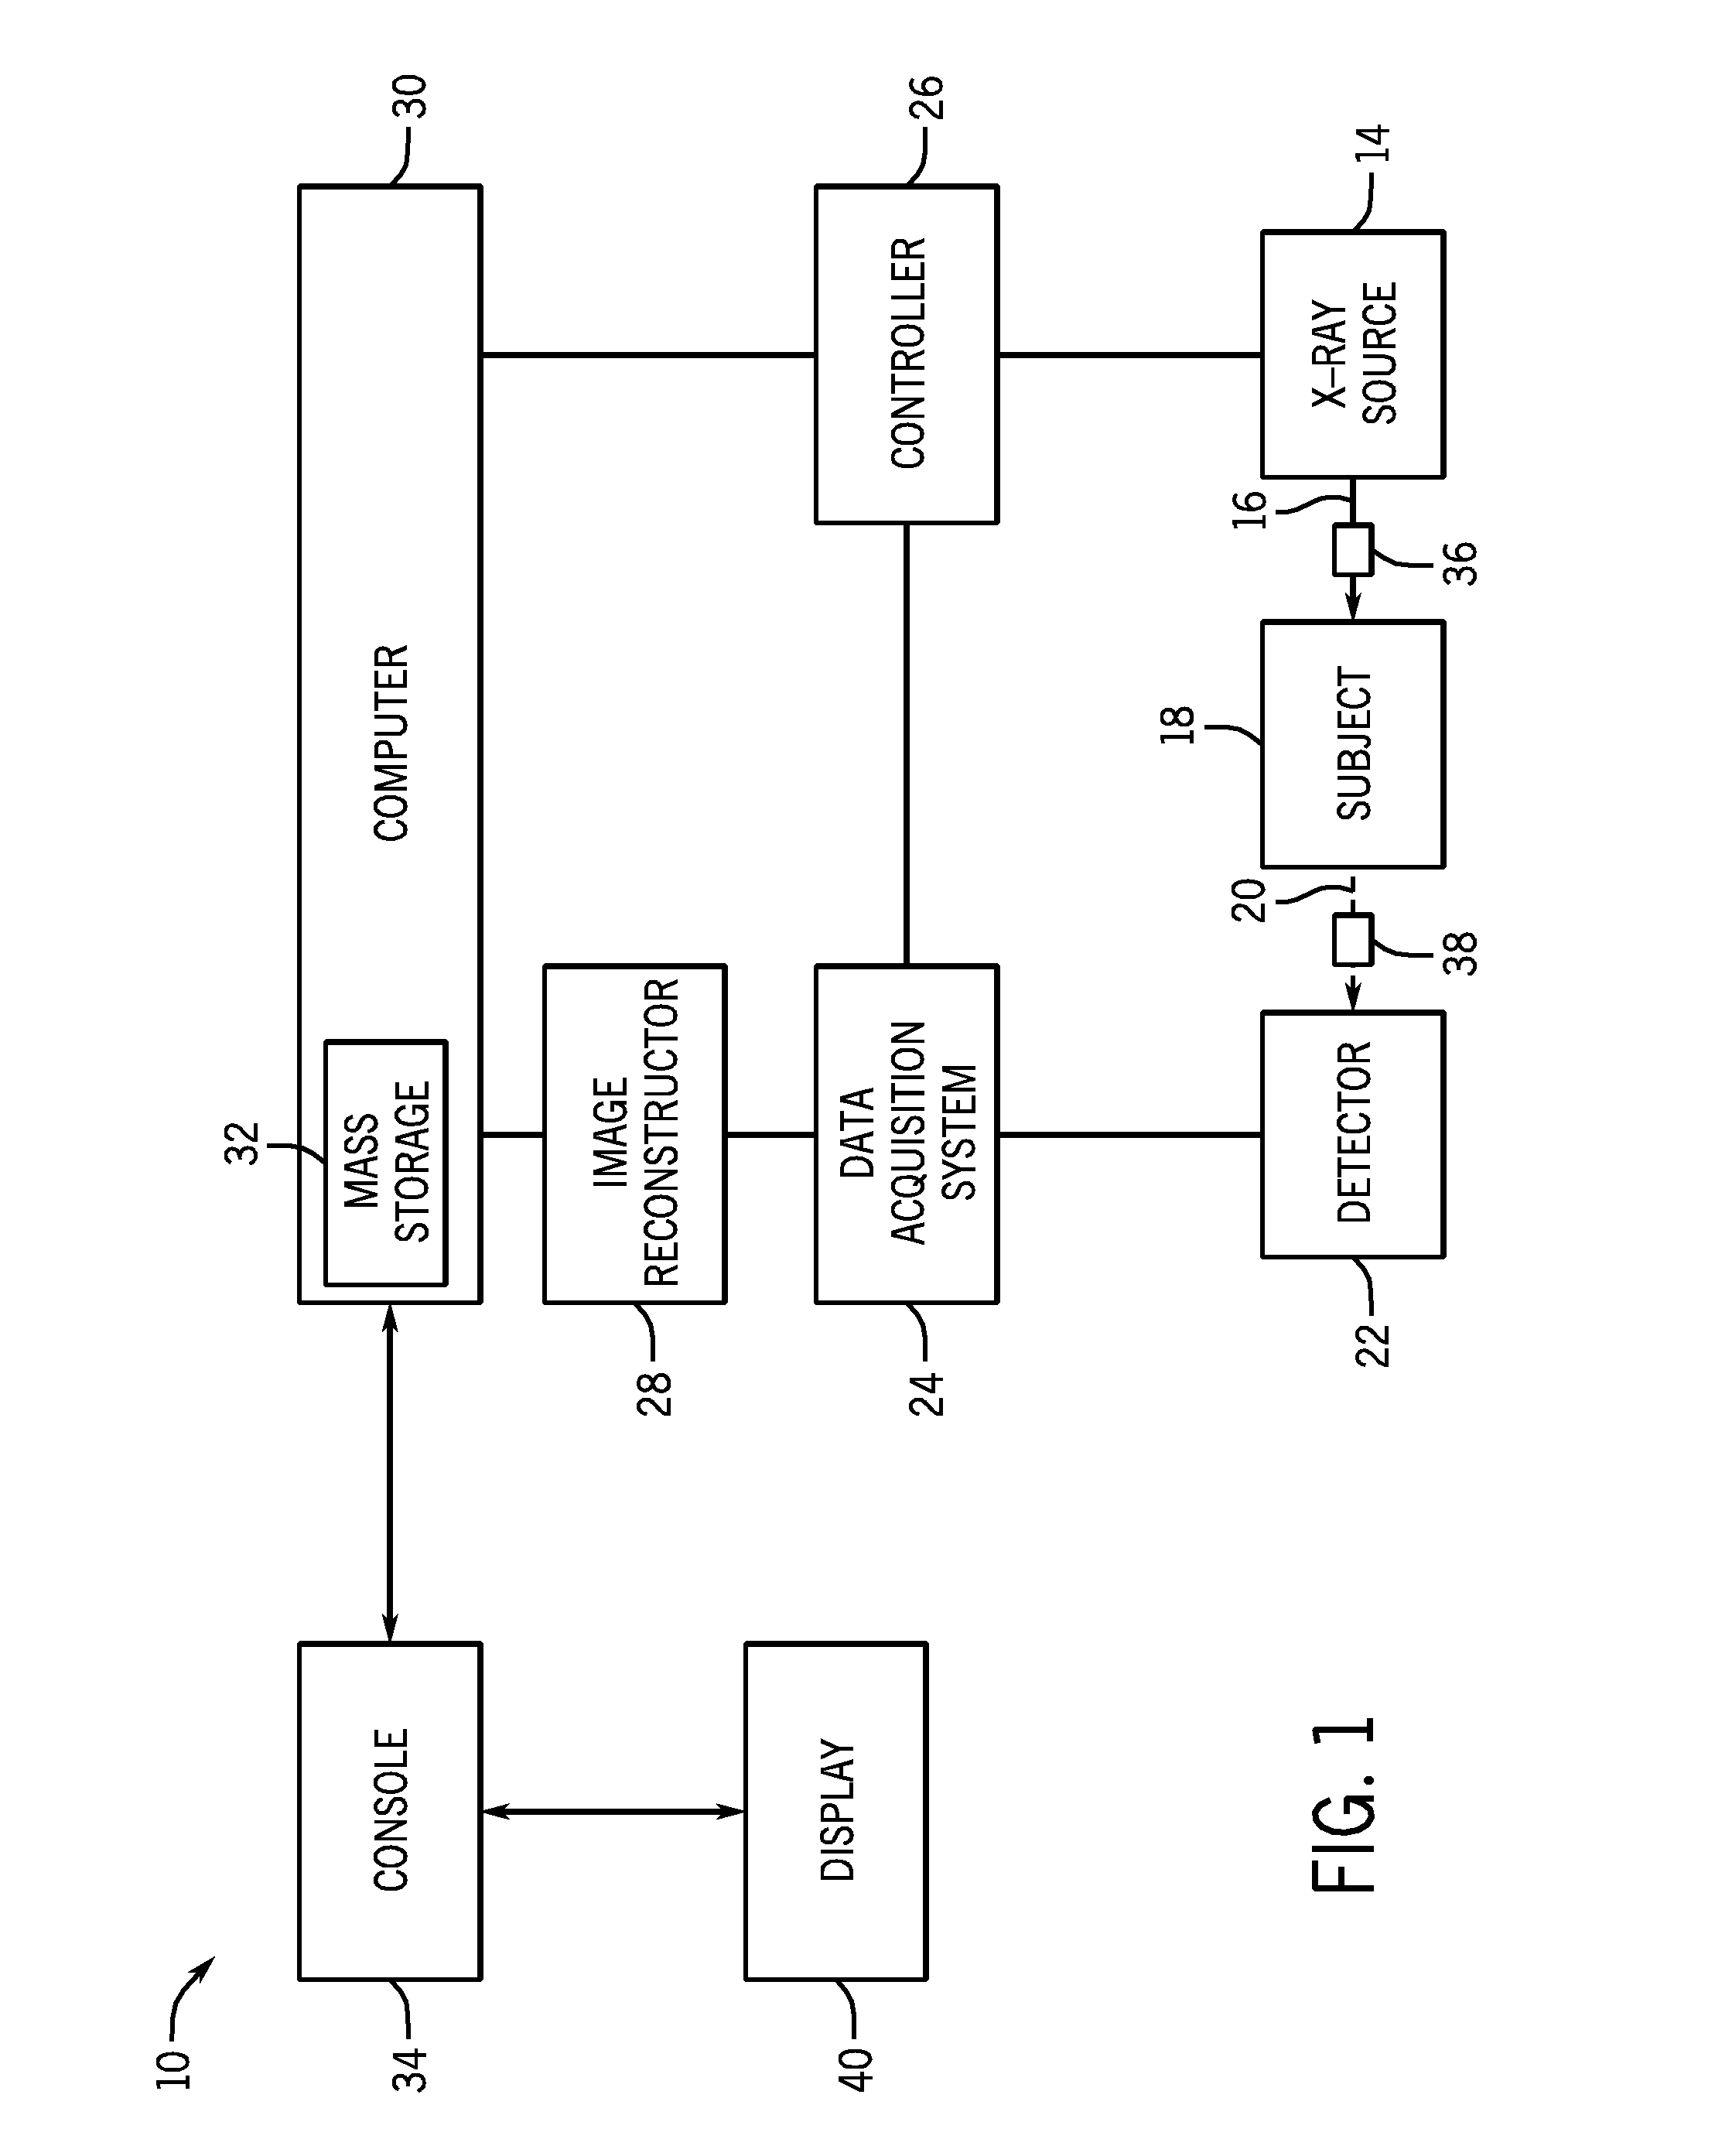 Multilayer x-ray source target with high thermal conductivity